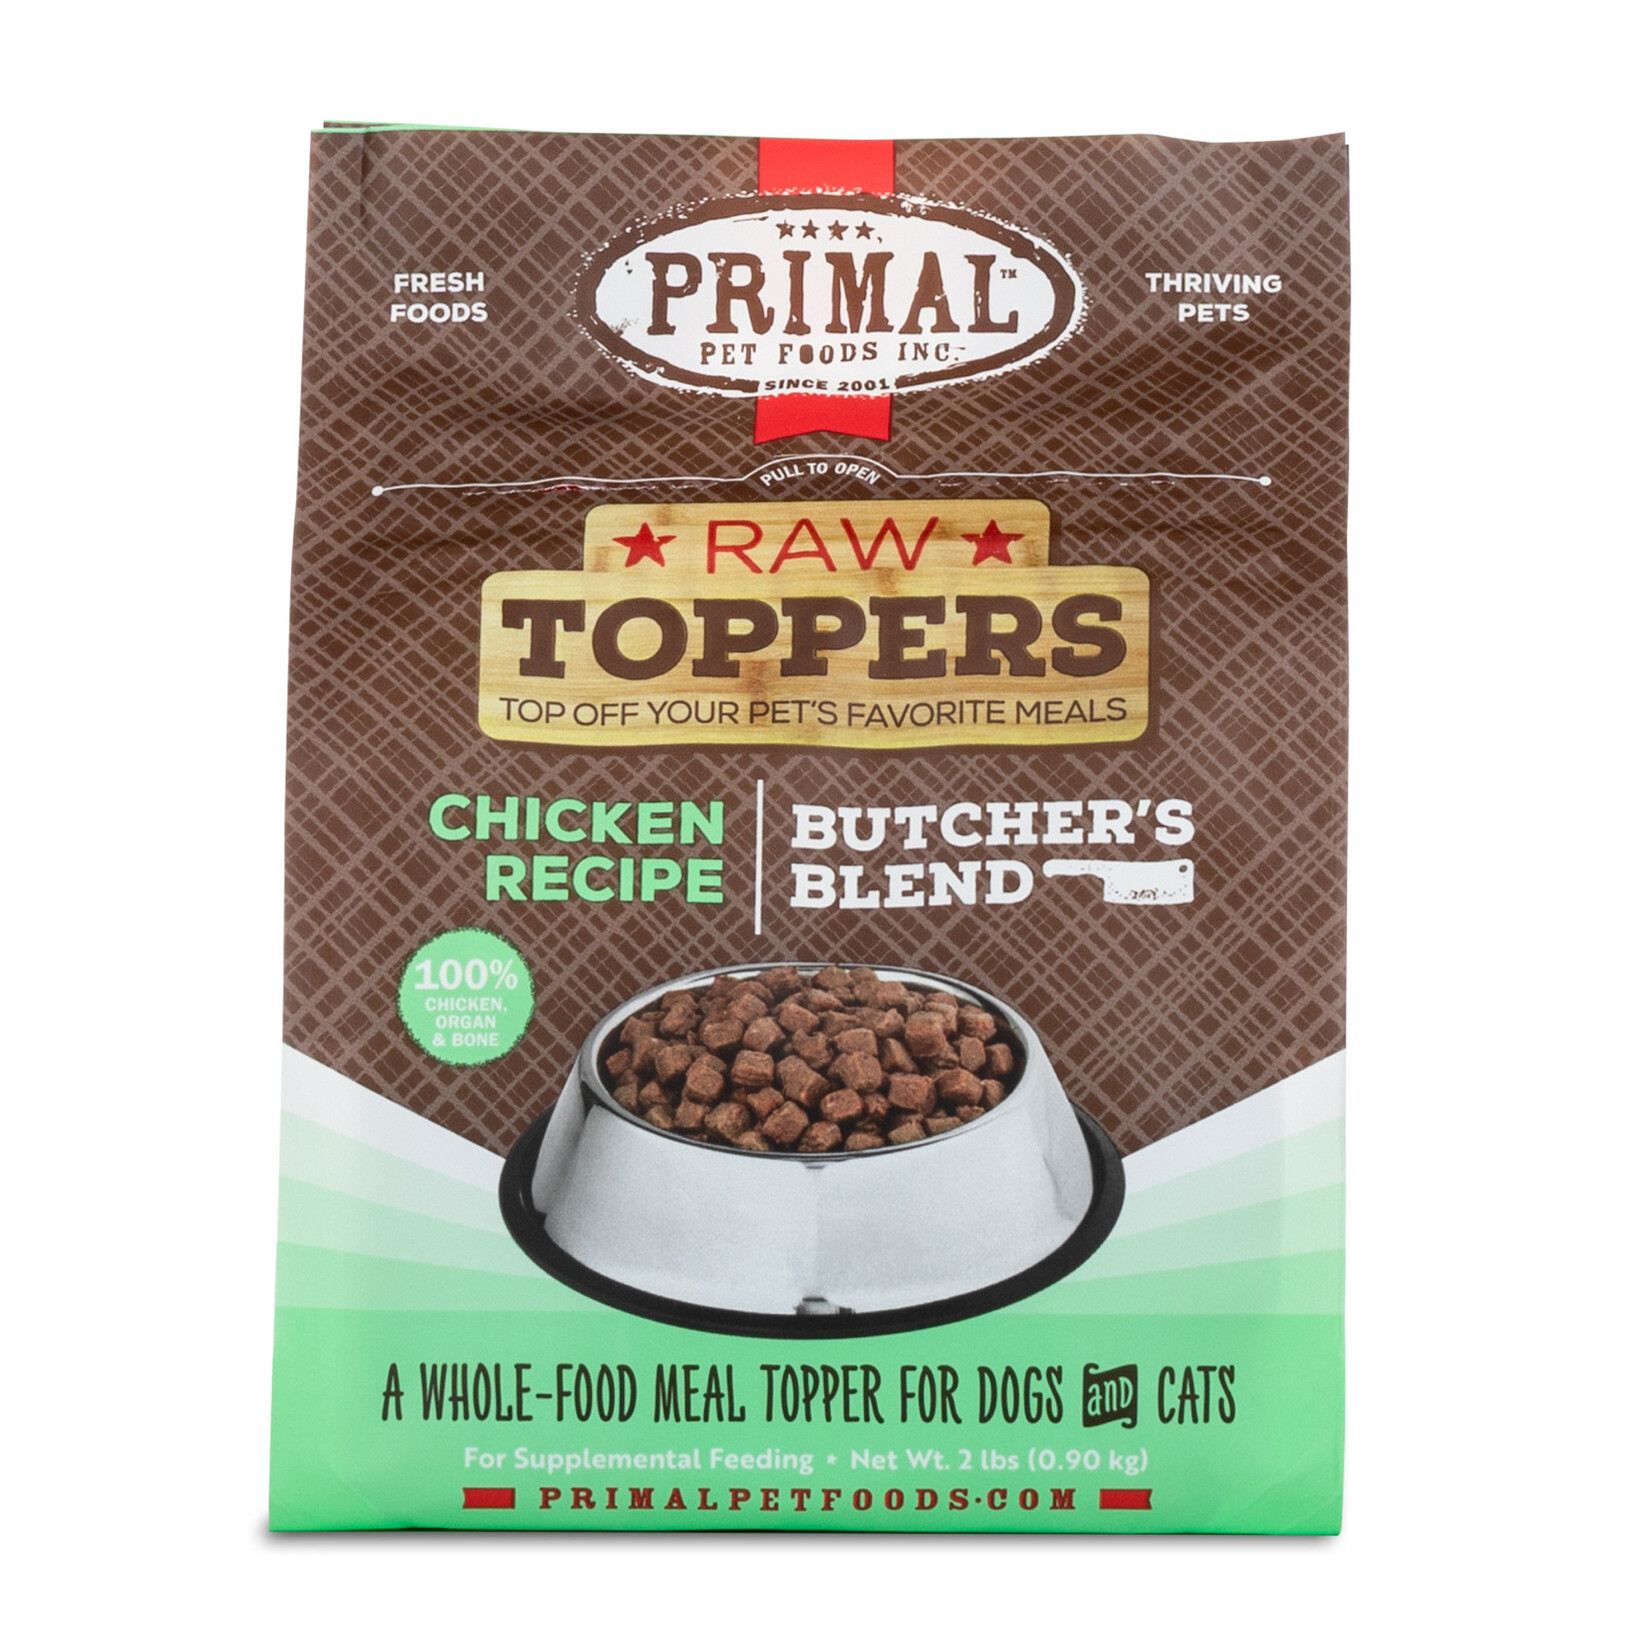 Primal Pet Foods Raw Toppers - Butcher's Blend Chicken (*Frozen Products for In-Store Pickup Only. *)